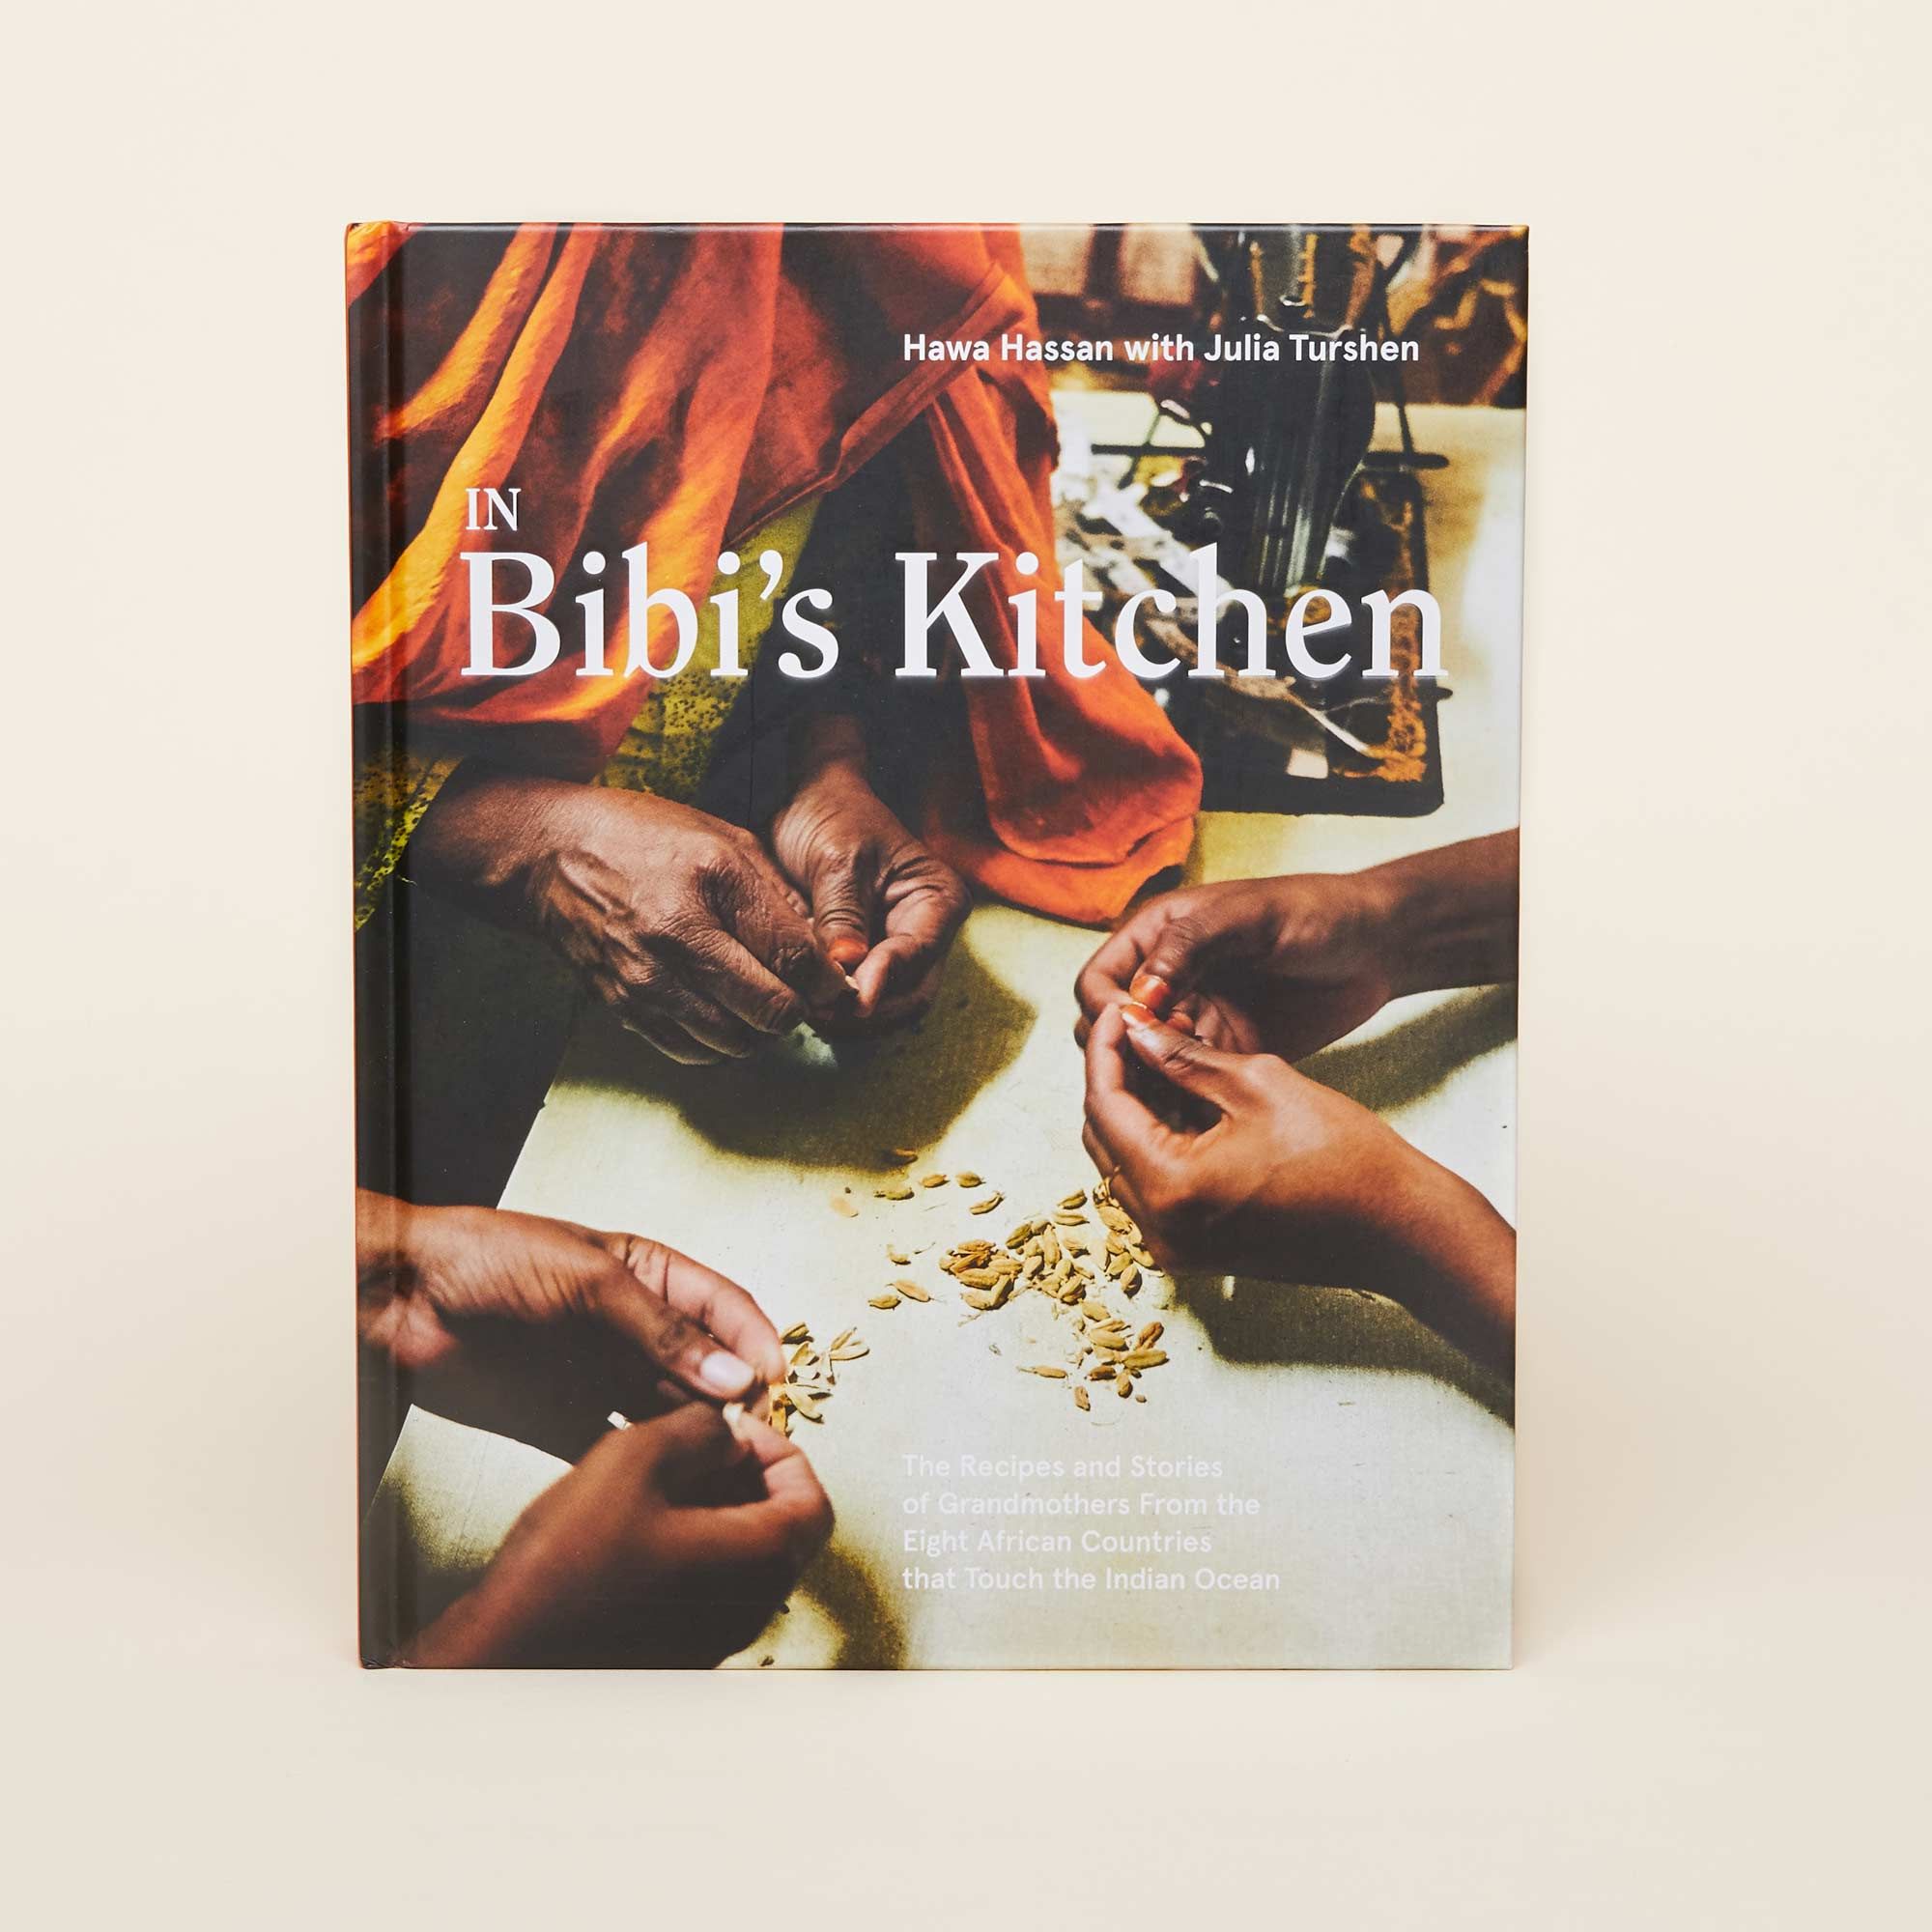 Front cover of the cookbook Bibi's Kitchen